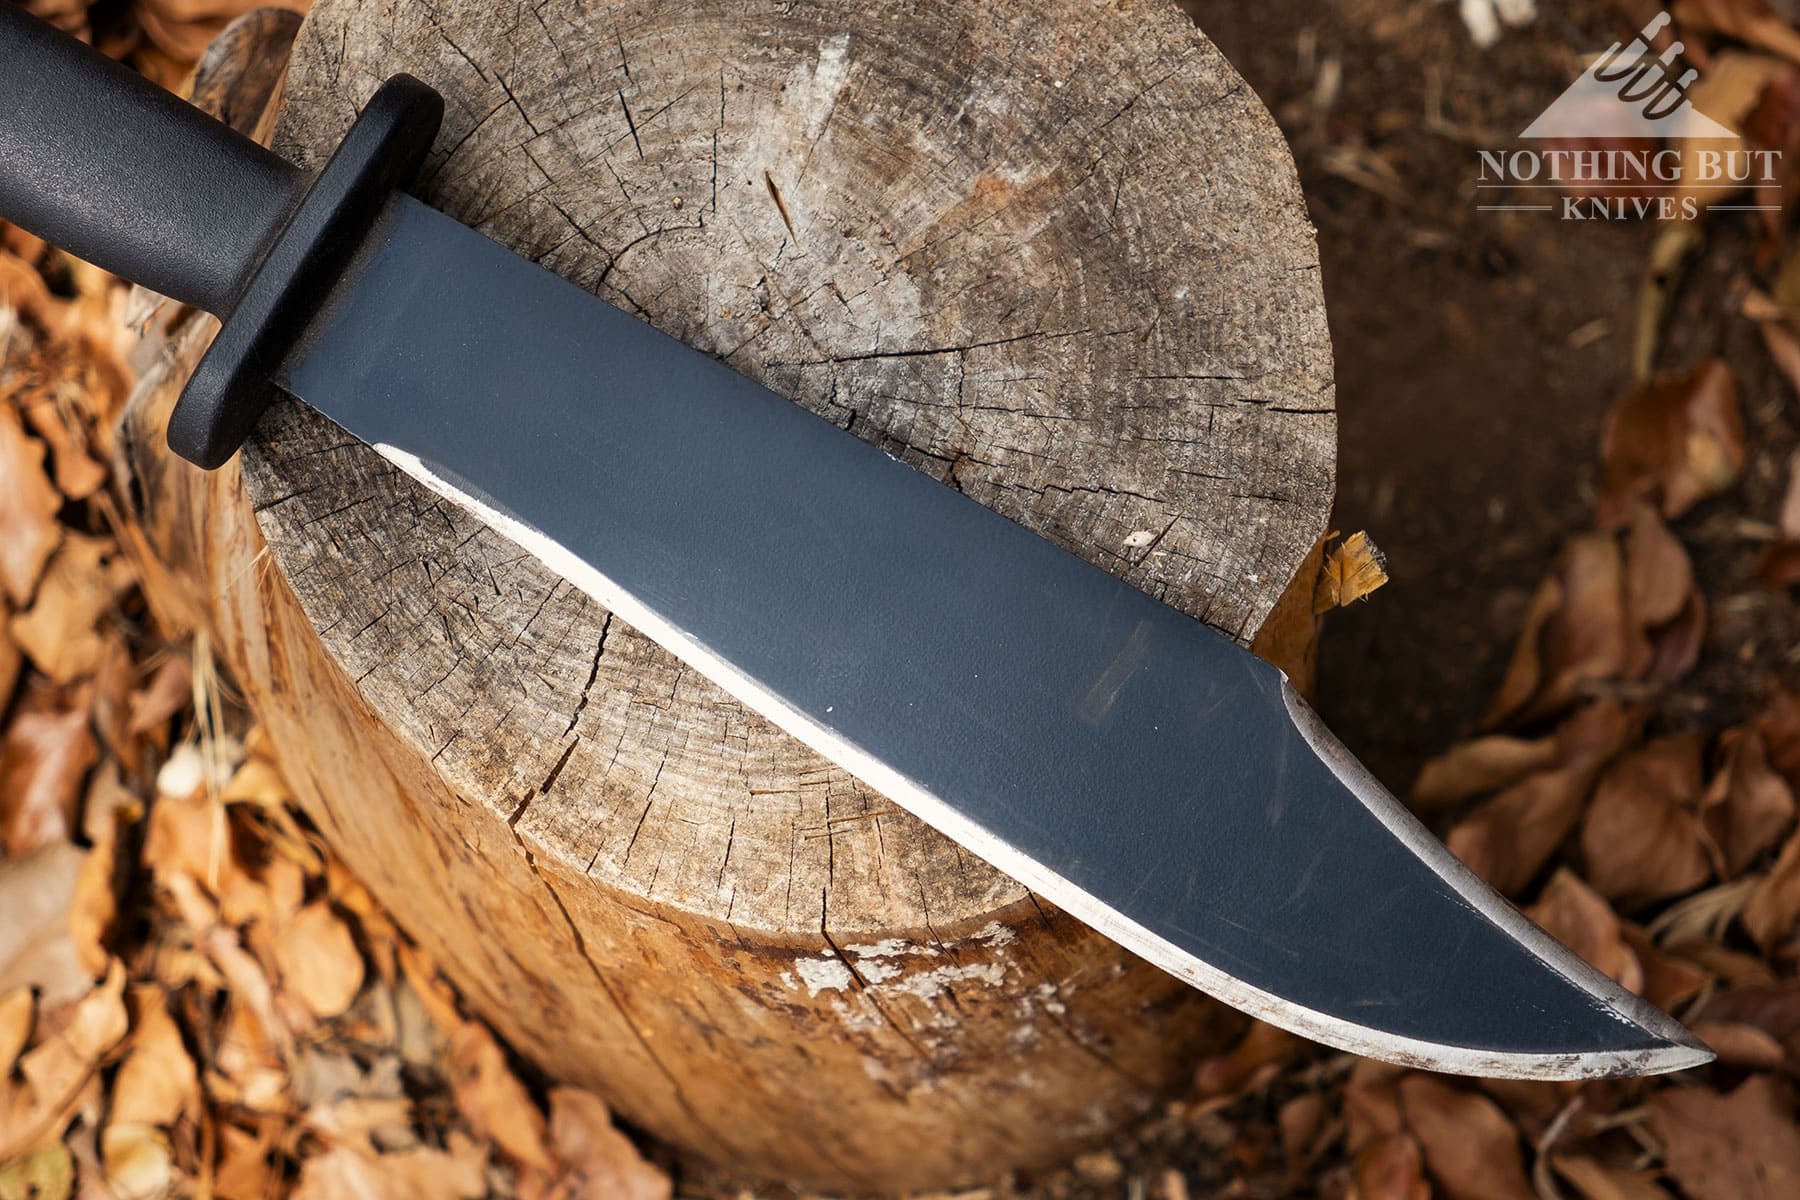 A close-up of the Black Bear Bowie knife blade on top of a firewood round.